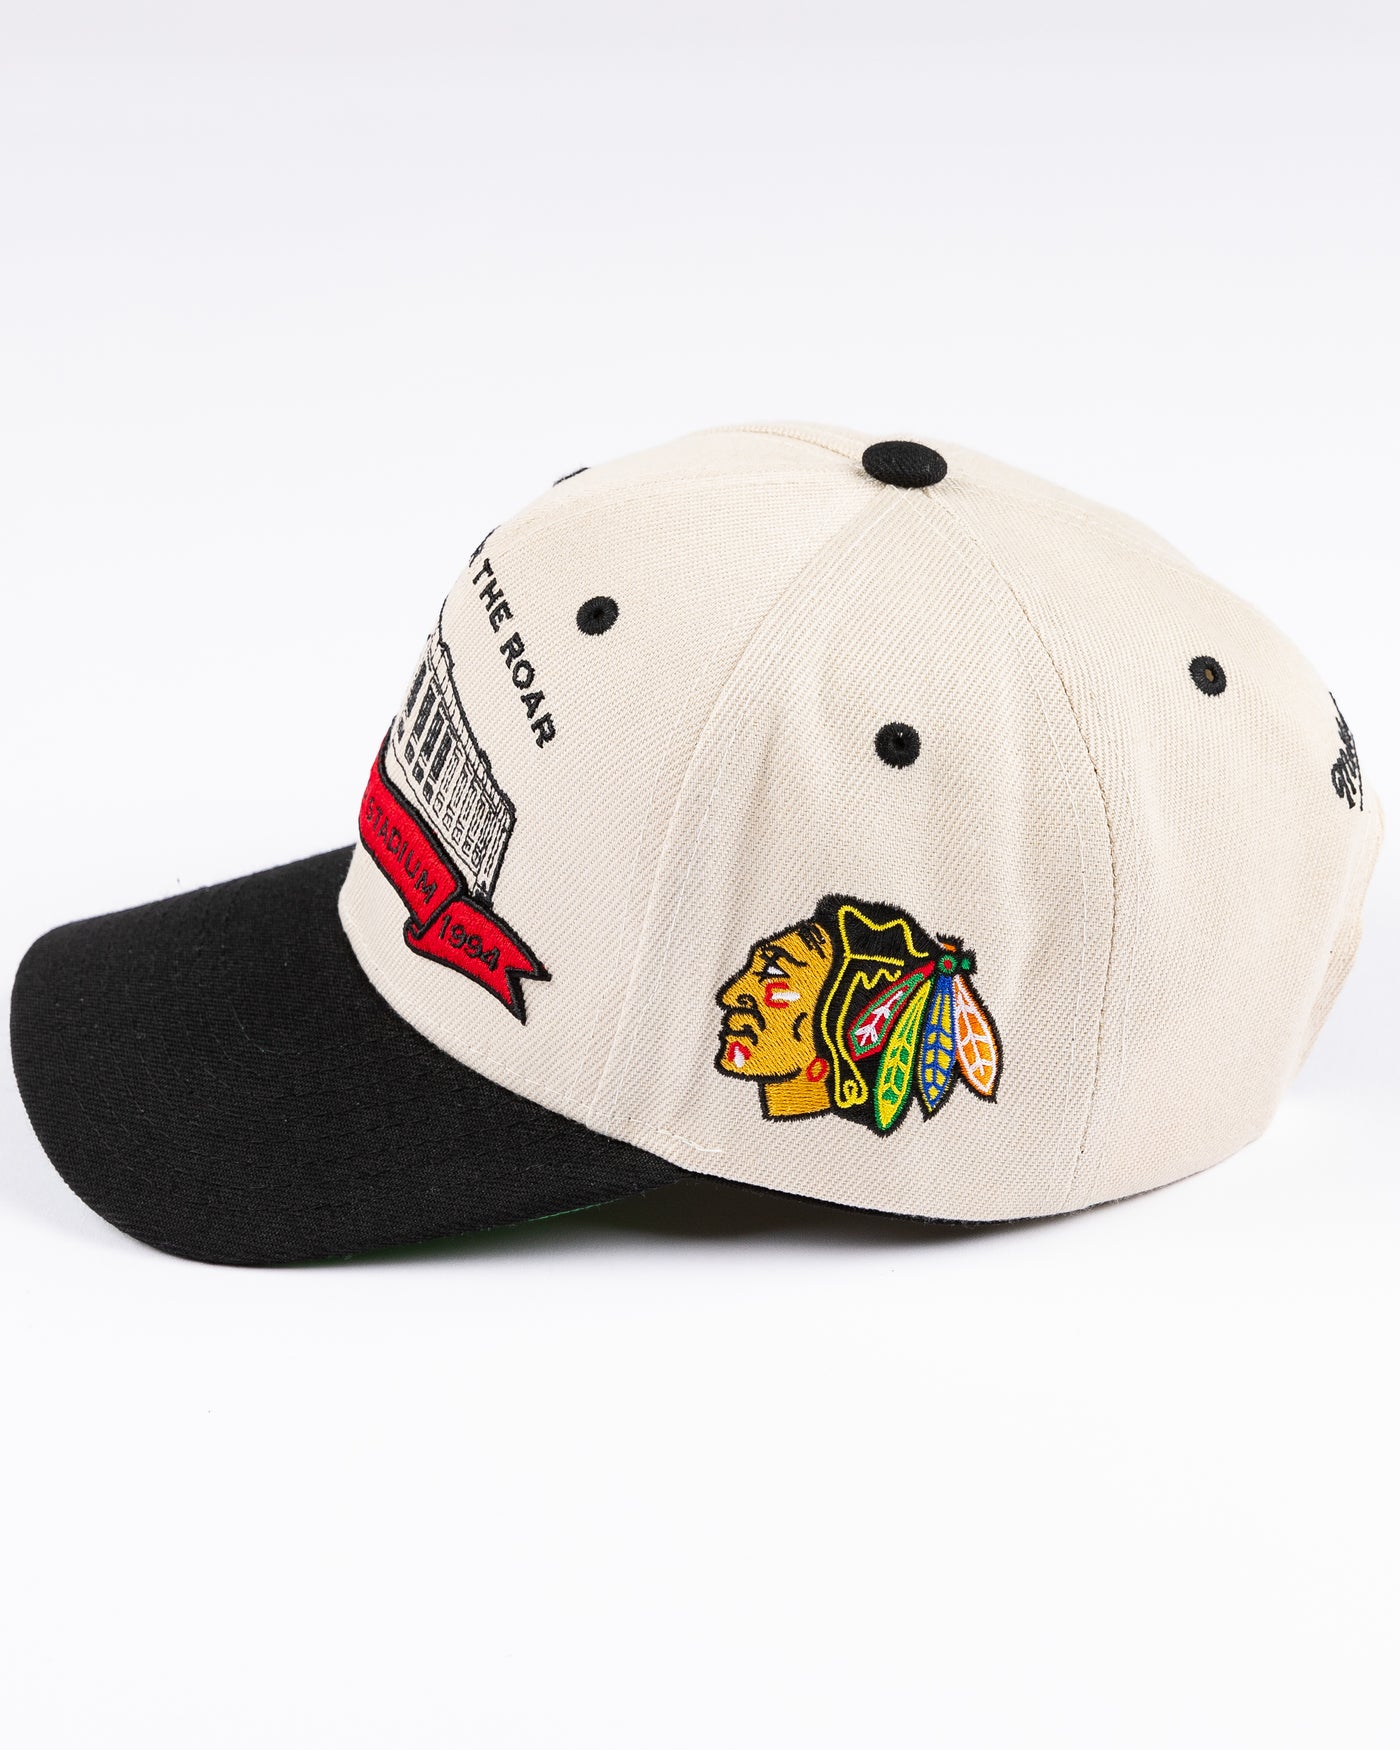 beige Mitchell & Ness snapback cap with Chicago Stadium embroidered design and Chicago Blackhawks primary logo on left side - left side lay flat